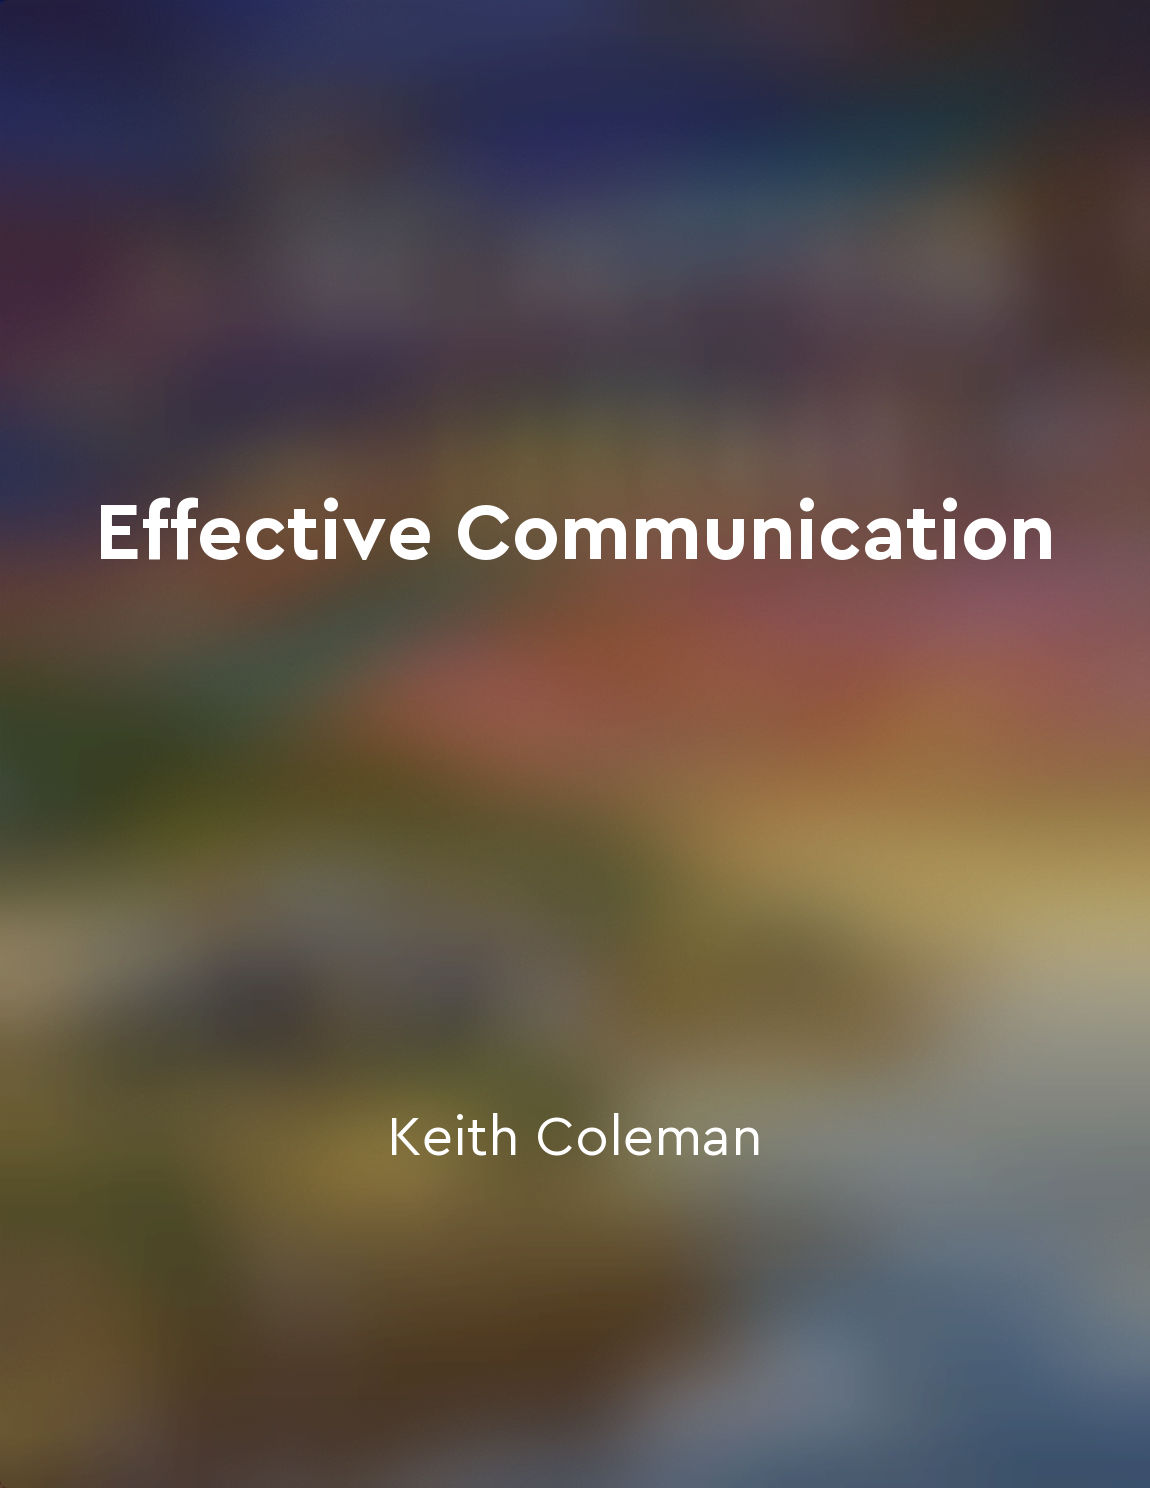 Choosing the right communication channel is important